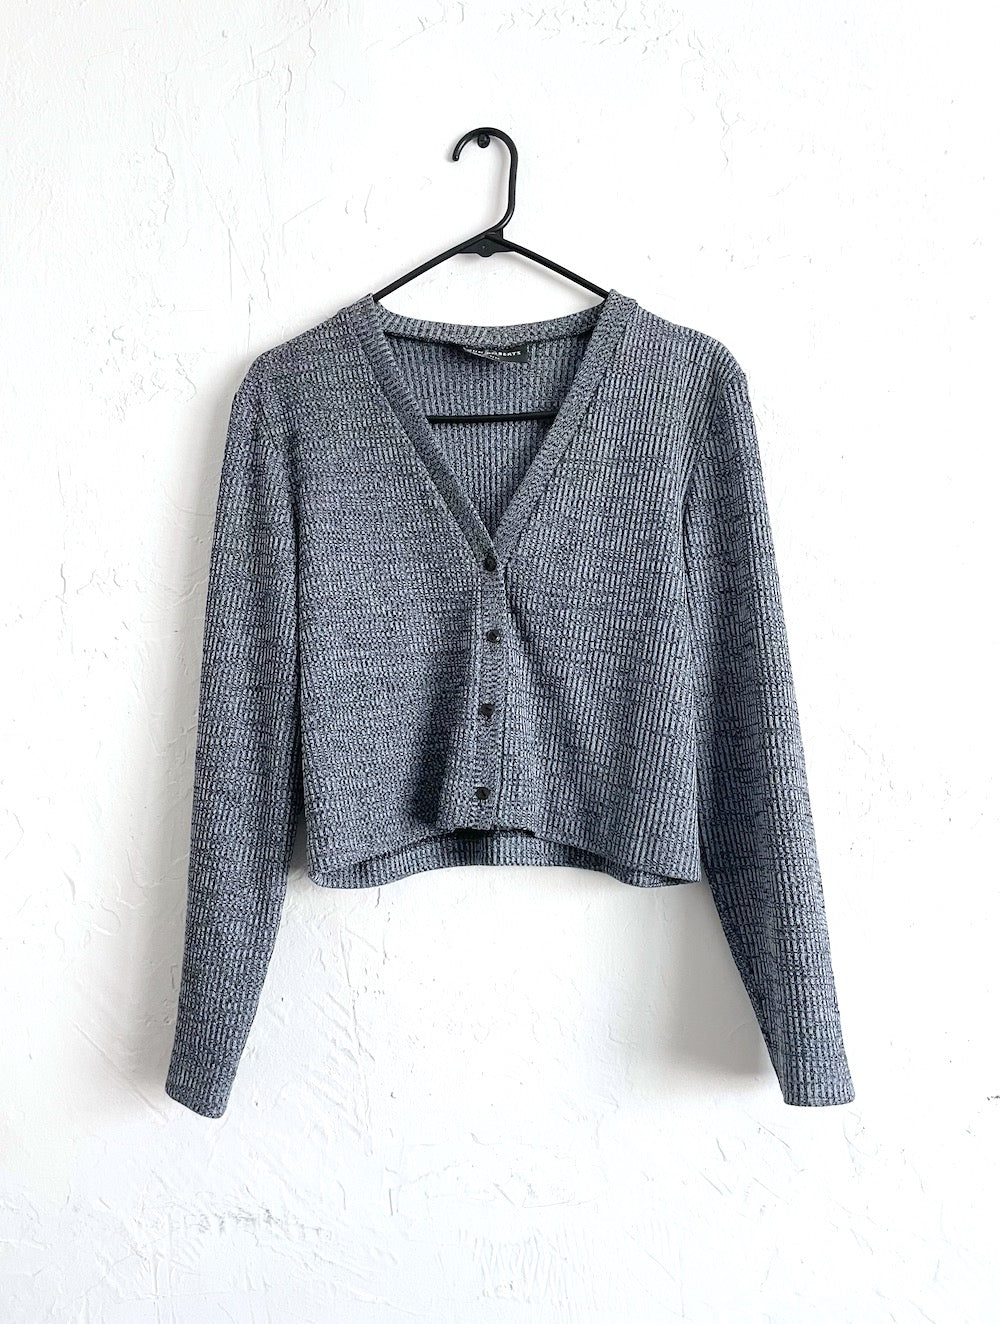 Vintage 90s Blue Cropped Textured Cardigan Top